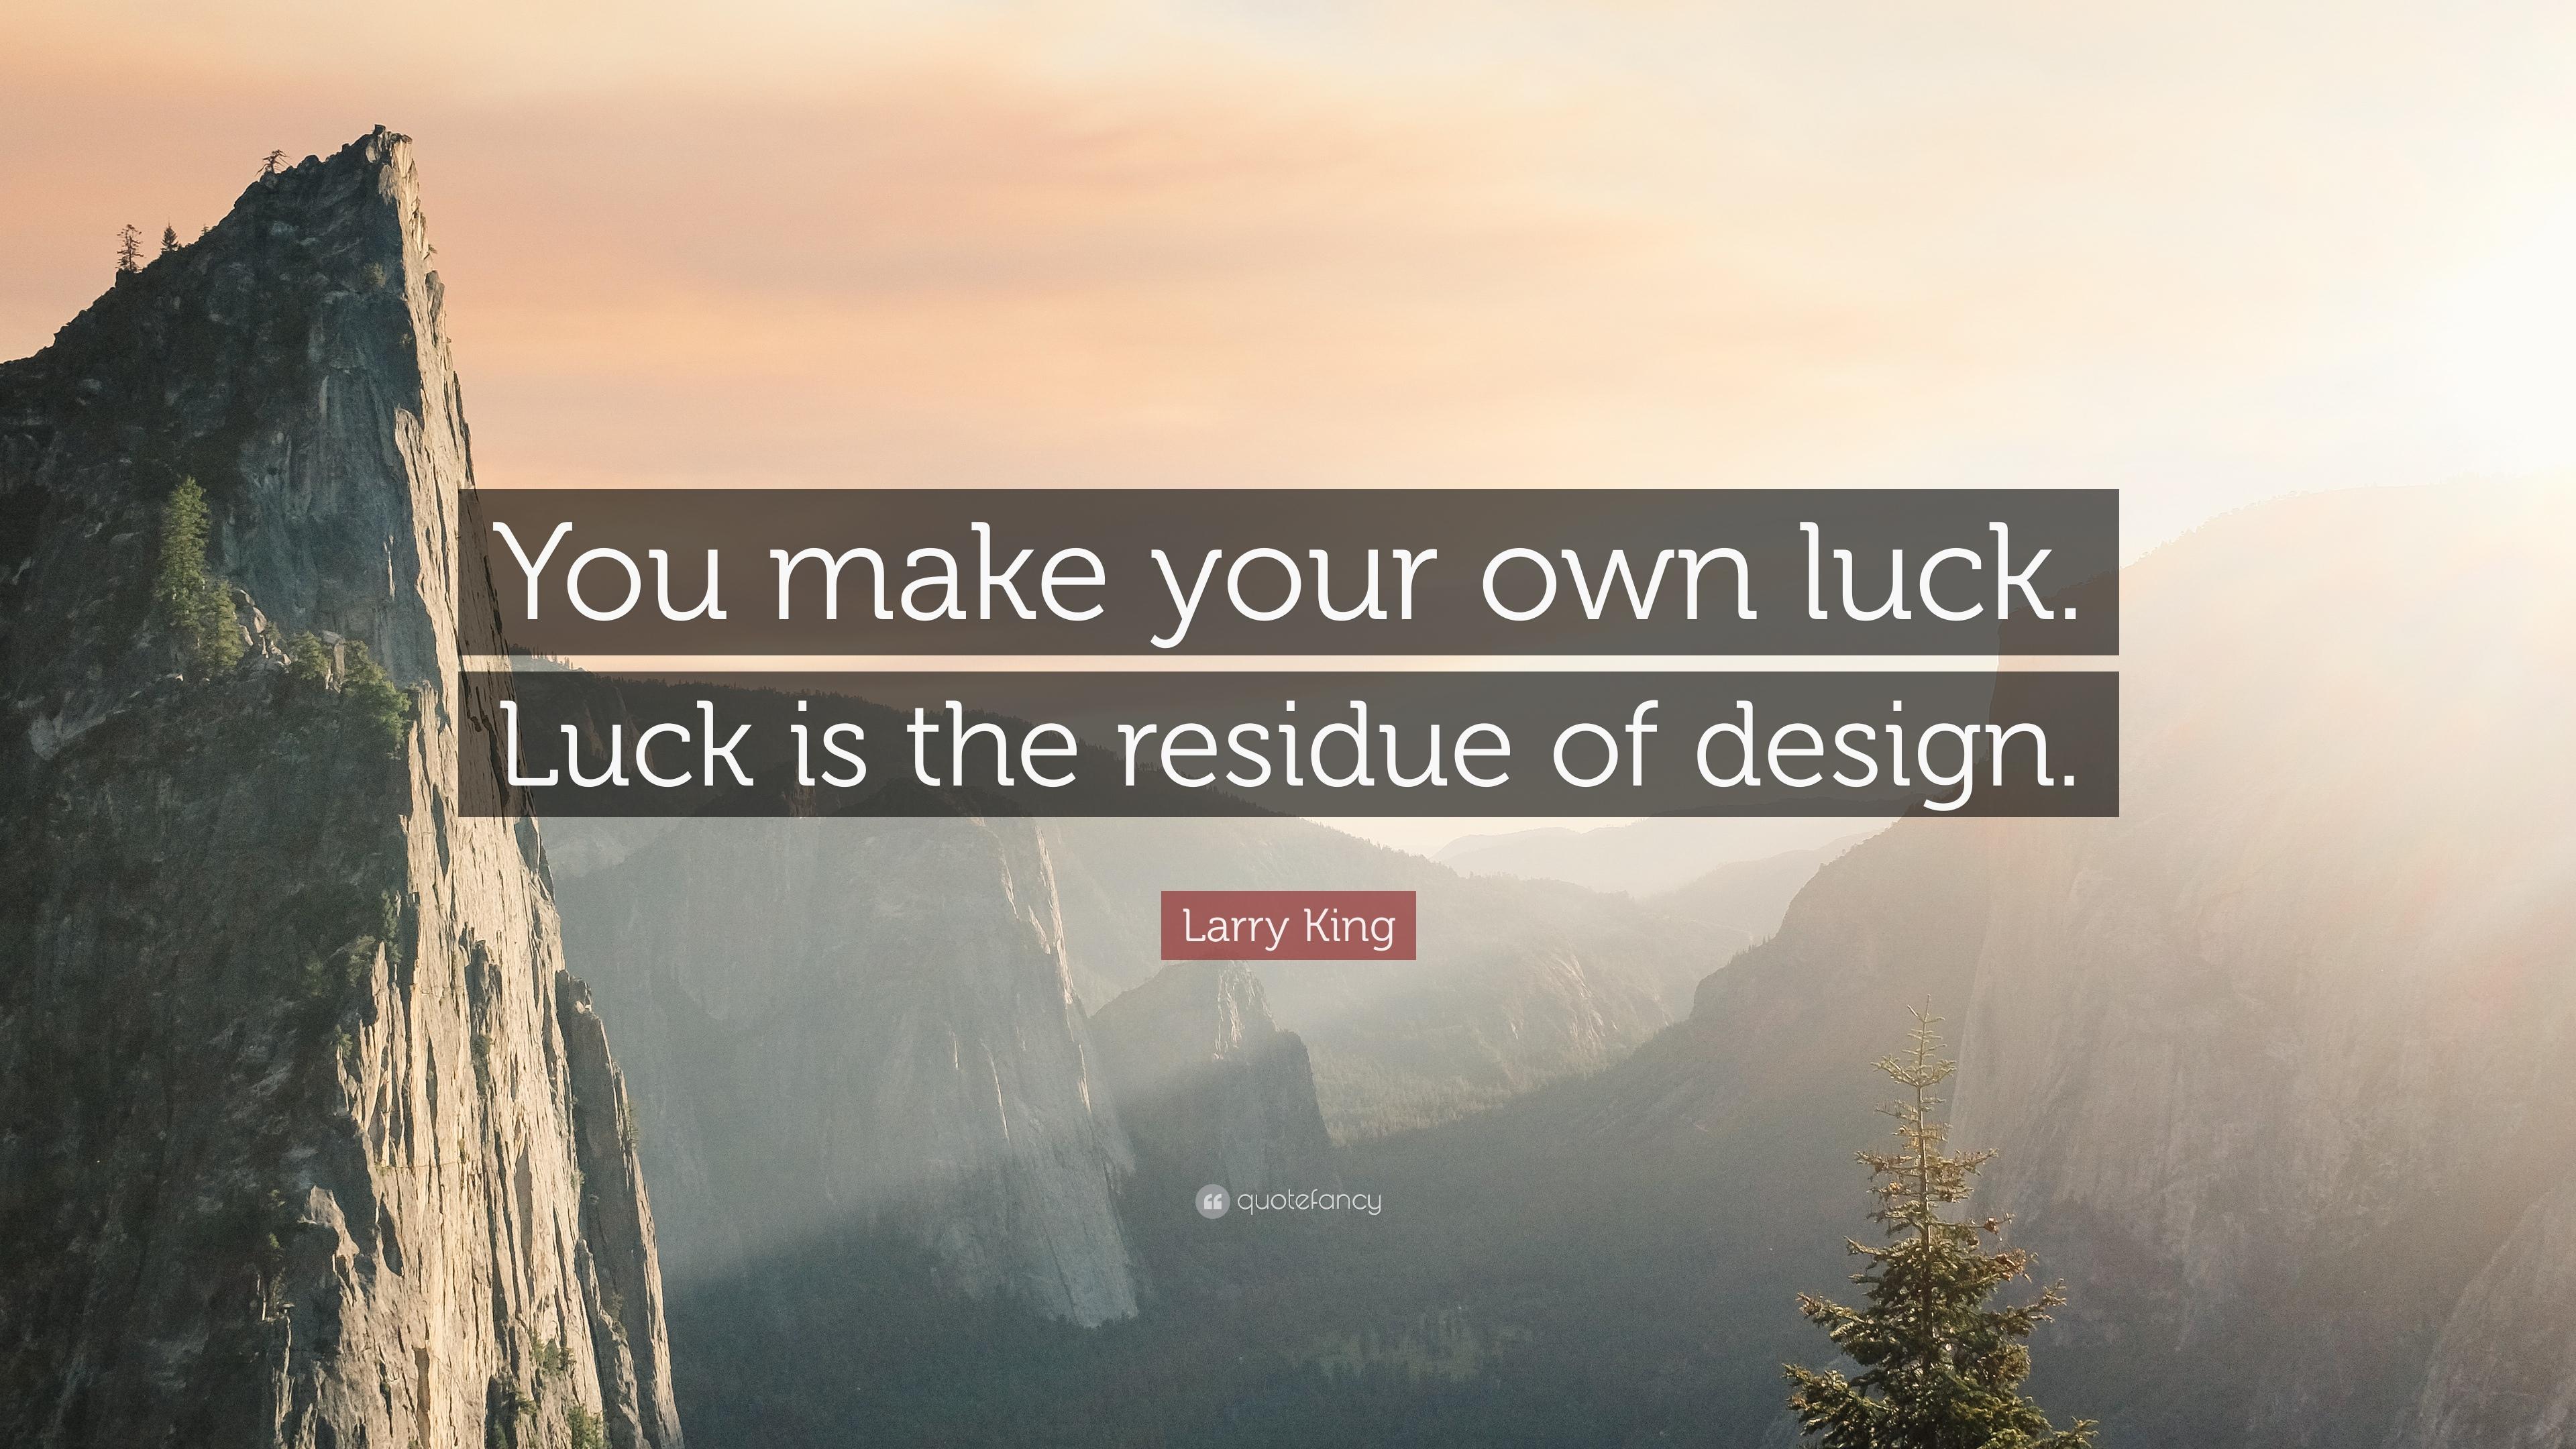 Larry King Quote: “You make your own luck. Luck is the residue